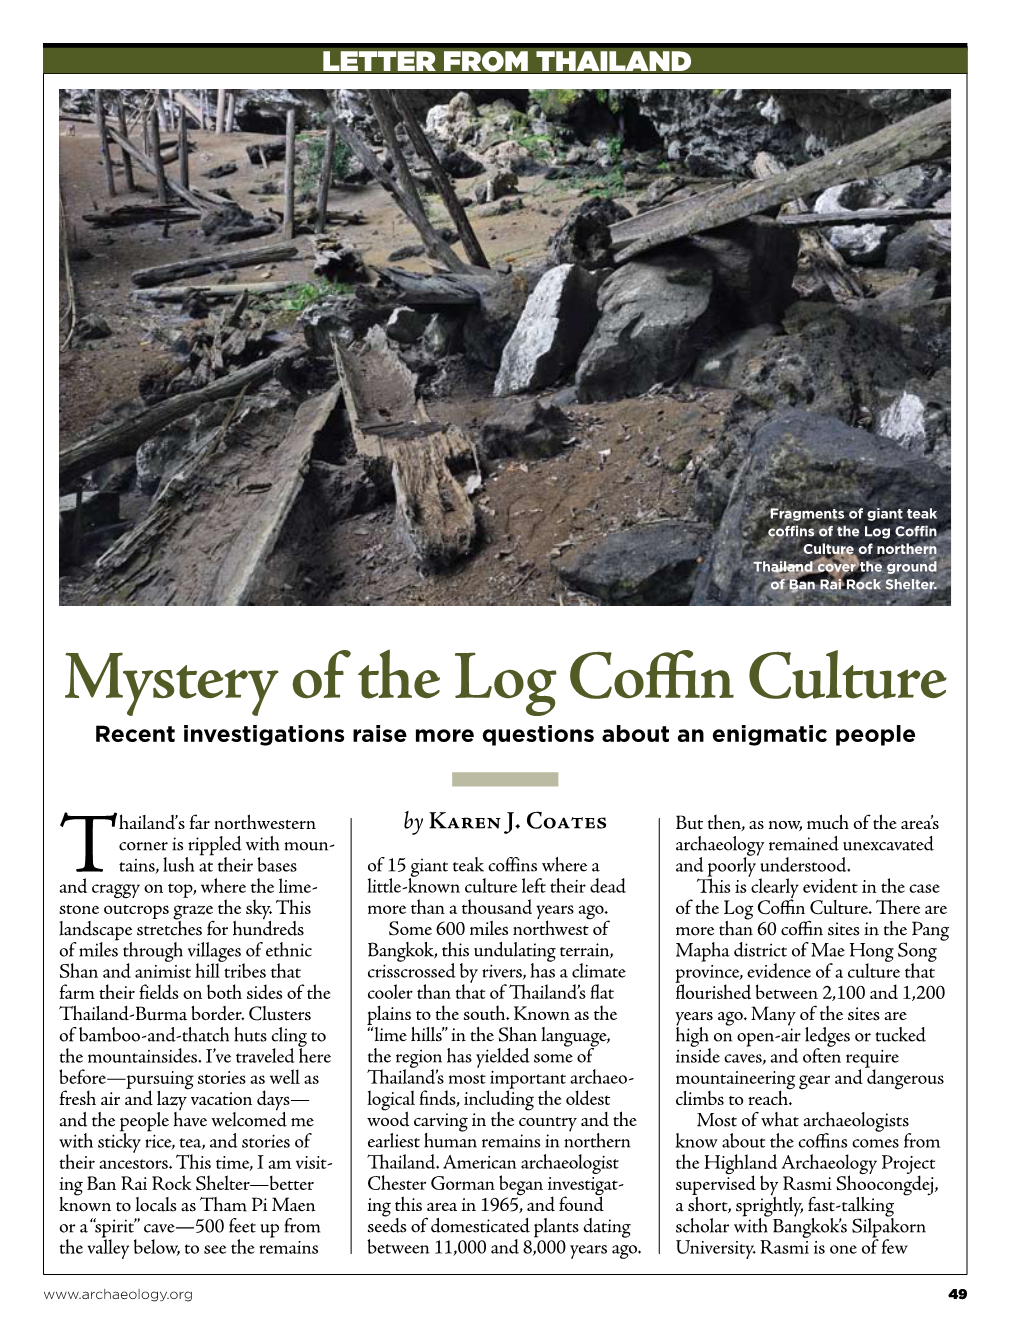 Mystery of the Log Coffin Culture Recent Investigations Raise More Questions About an Enigmatic People